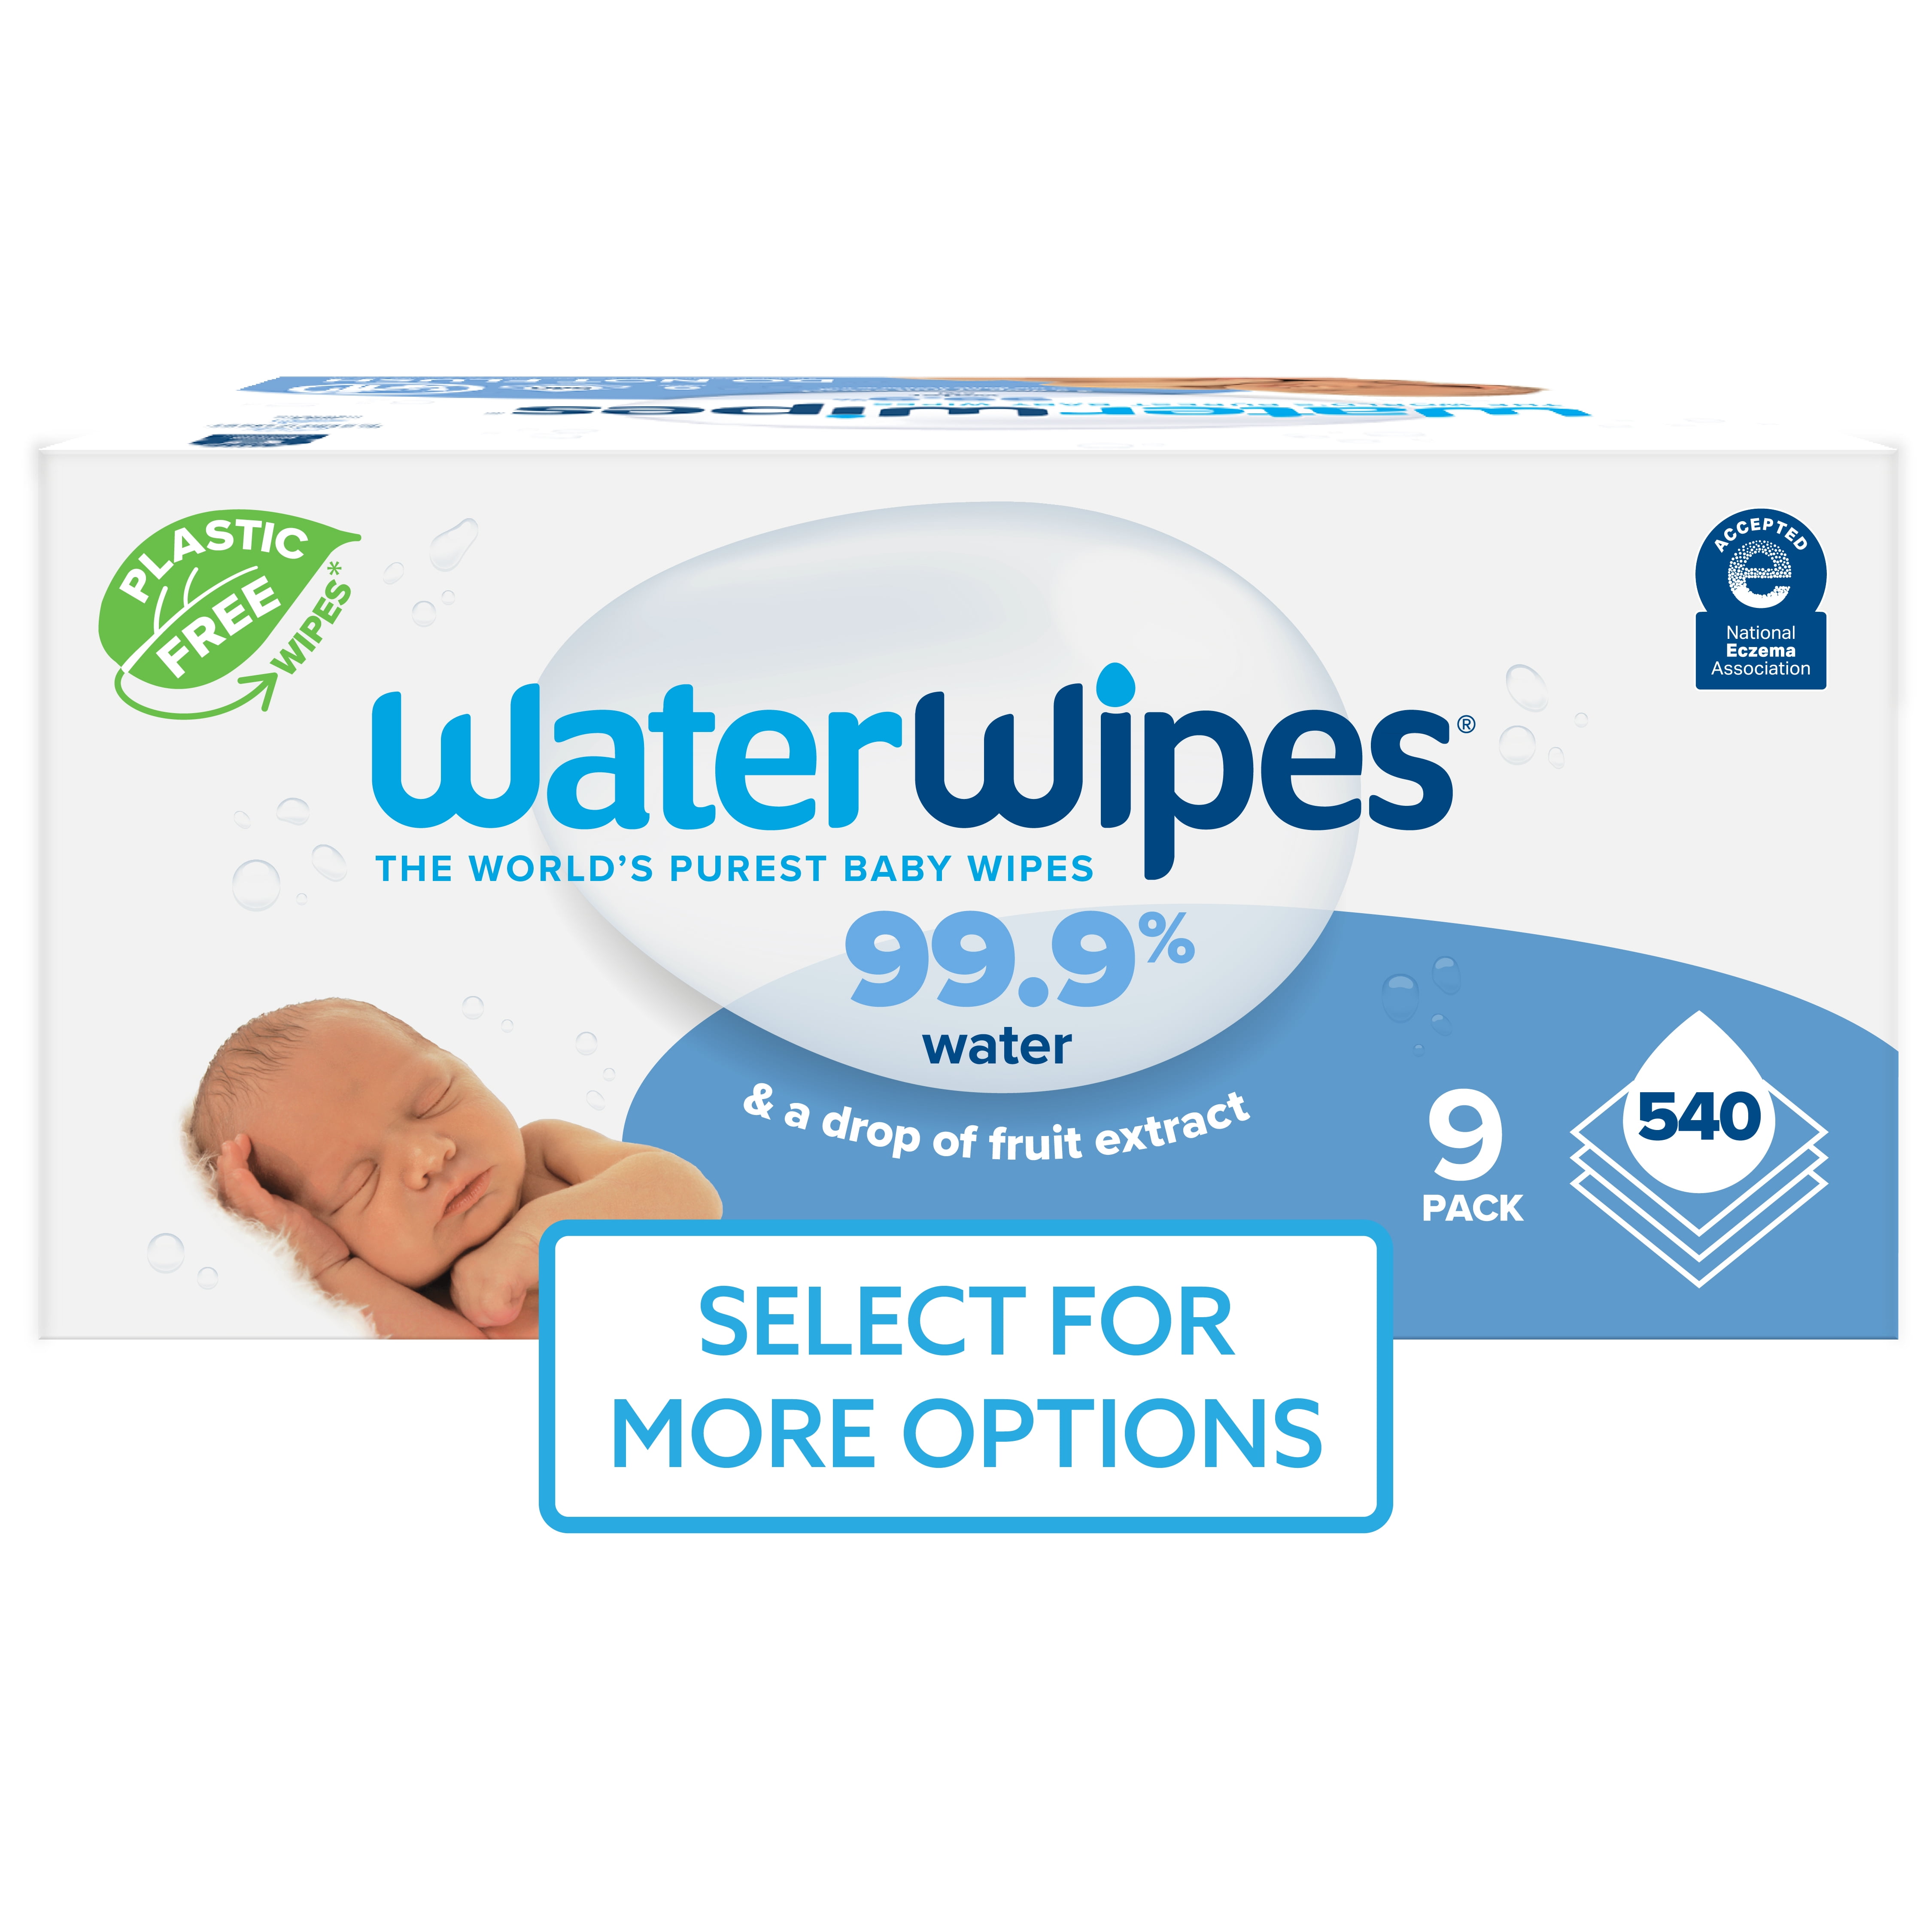 Breast Pump Wipes by Dapple Baby, 25 Count (Pack of 3), Fragrance Free,  Plant Based & Hypoallergenic Breast Pump Wipes - Removes Milk Residue,  Leaves